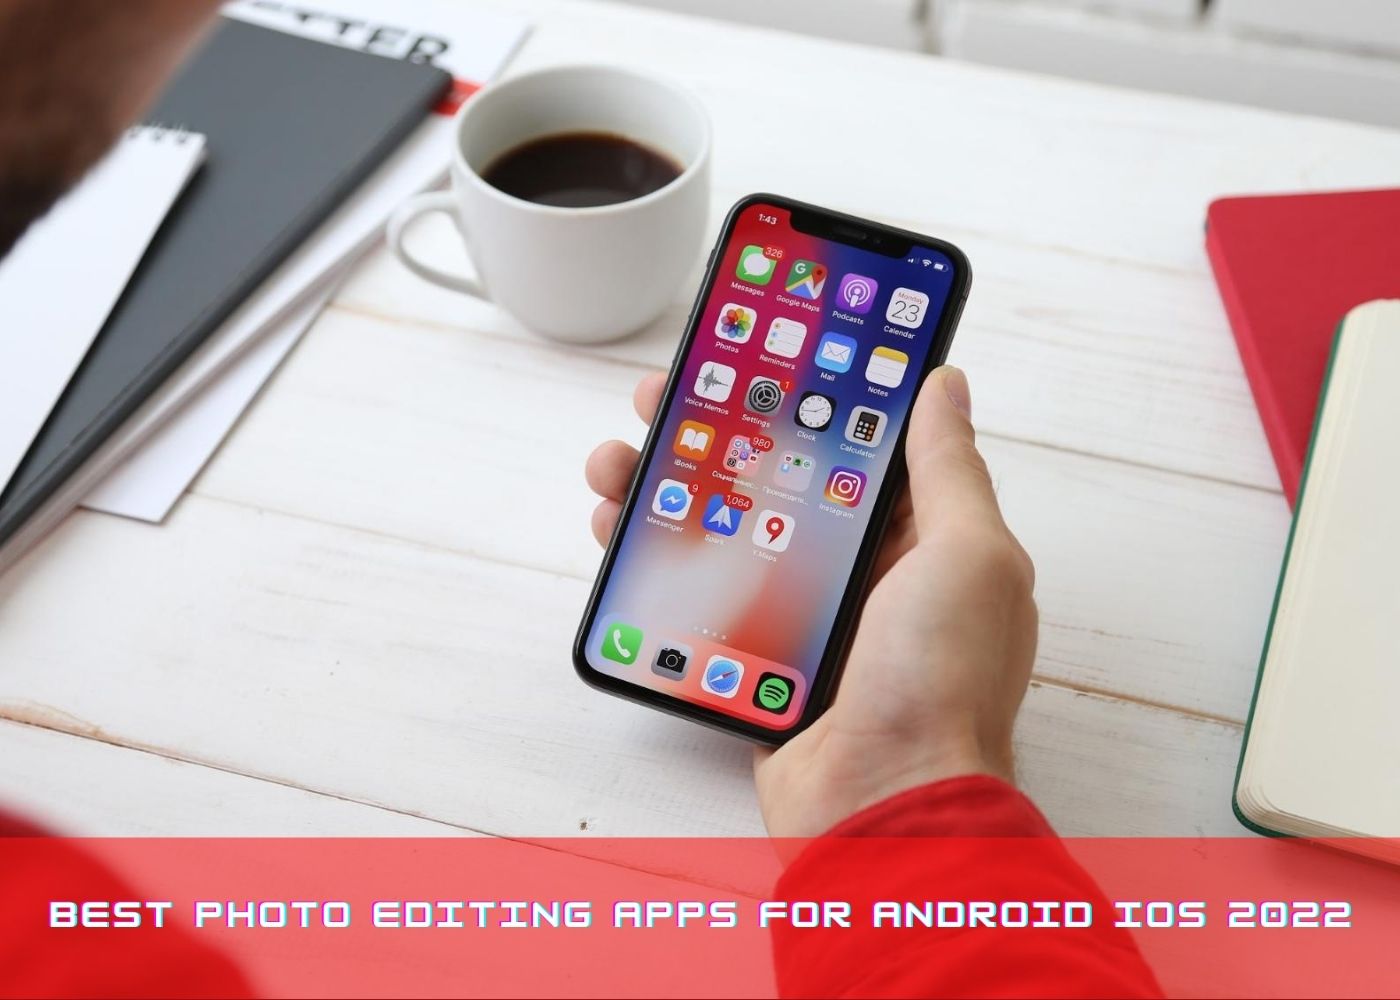 Best Photo Editing Apps for Android iOS 2022